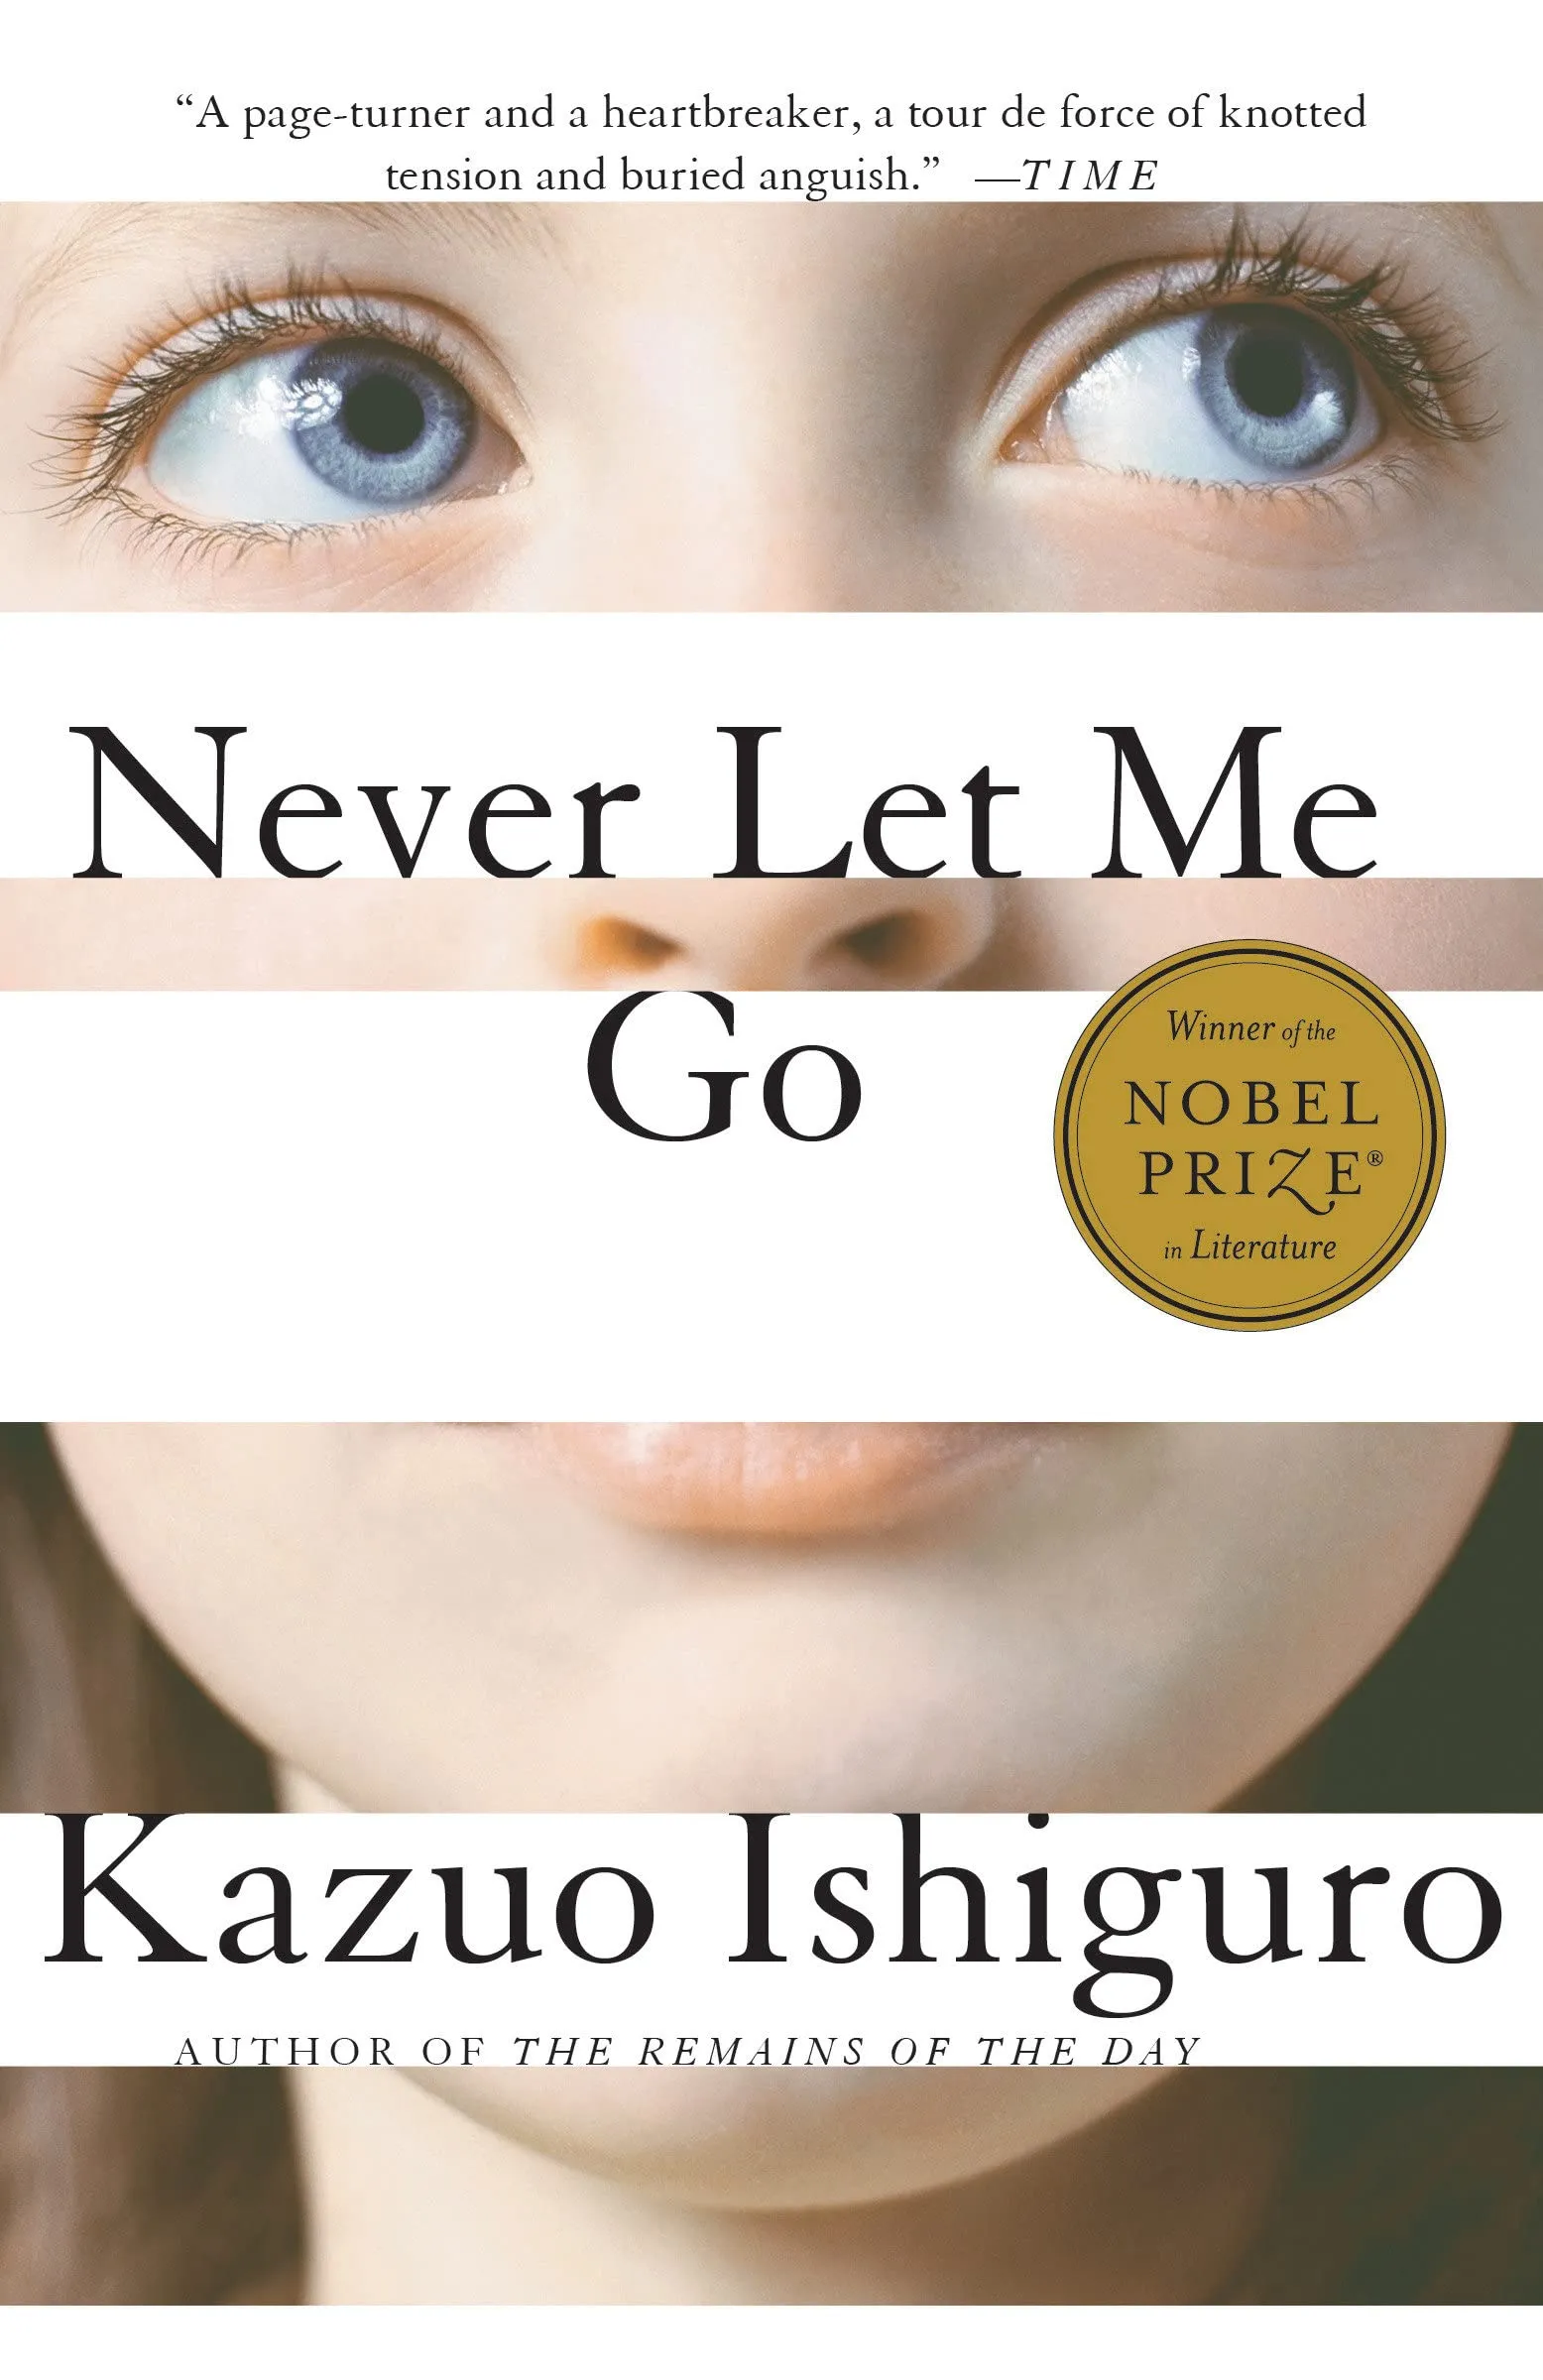 A graphic of the cover of r Let Me Go by Kazuo Ishiguro